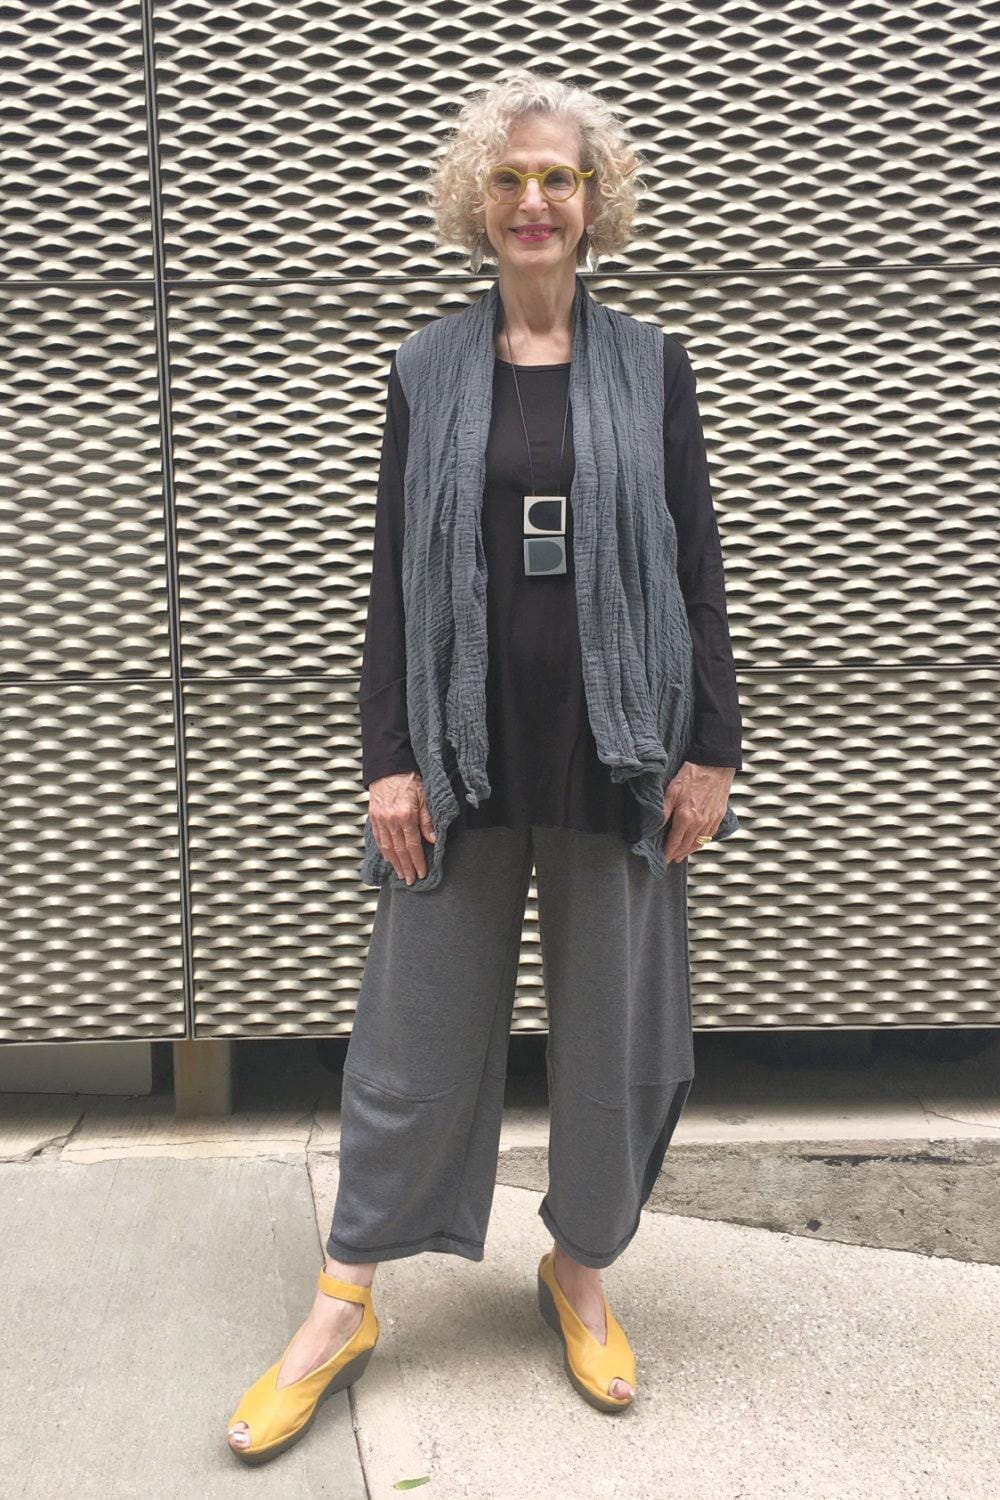 Senior woman with necklength blond hair wearing a stylish casual outfit. Grey vest and loose fit pants with a long sleeve black tee.